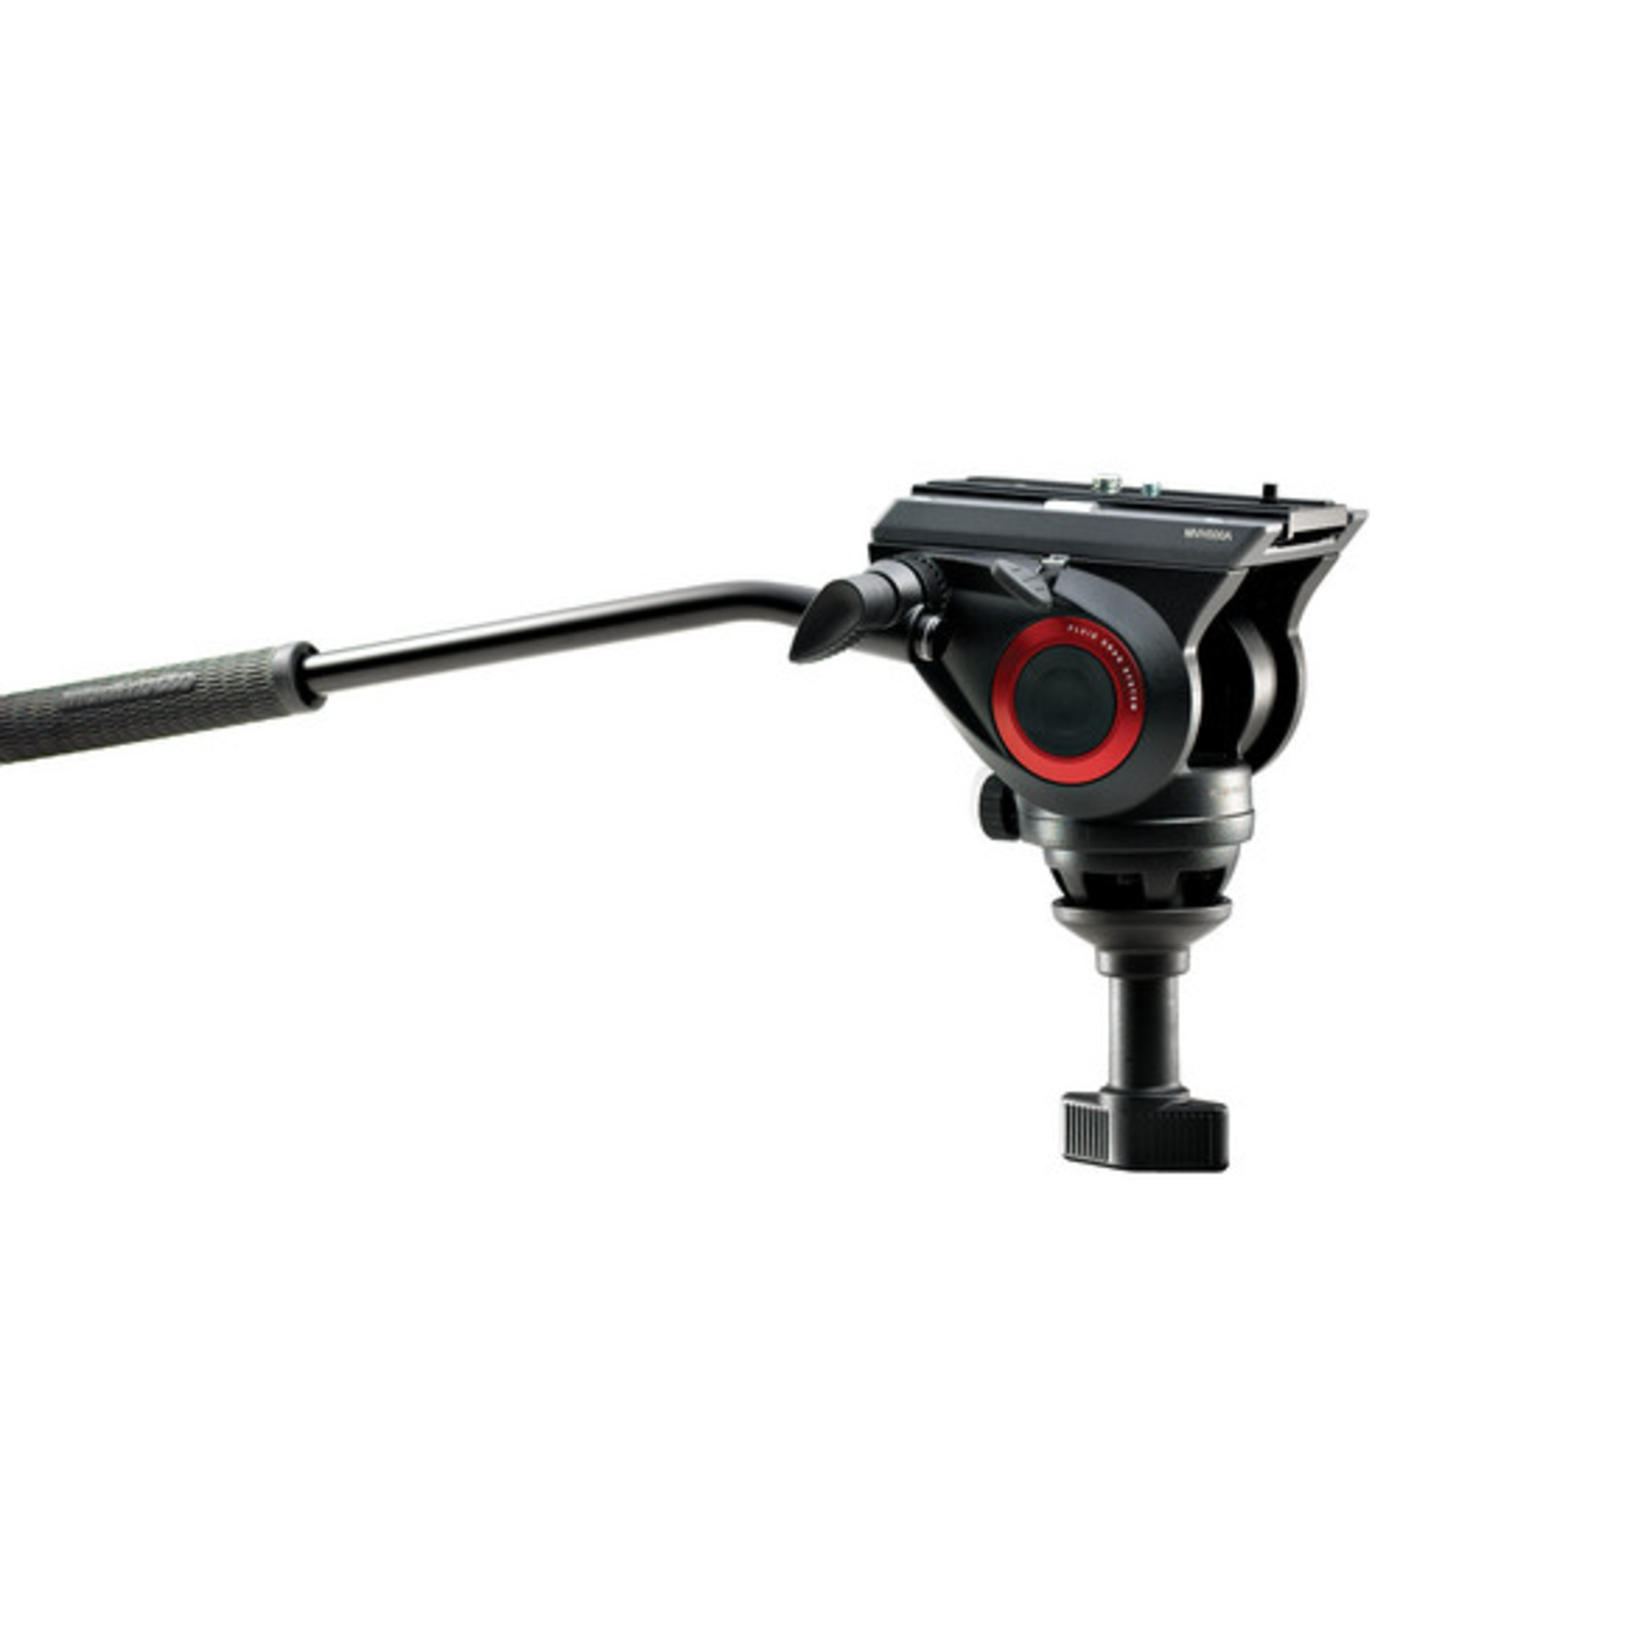 Manfrotto Manfrotto MVH500A Fluid Drag Video Head with MVT502AM Tripod and Carry Bag